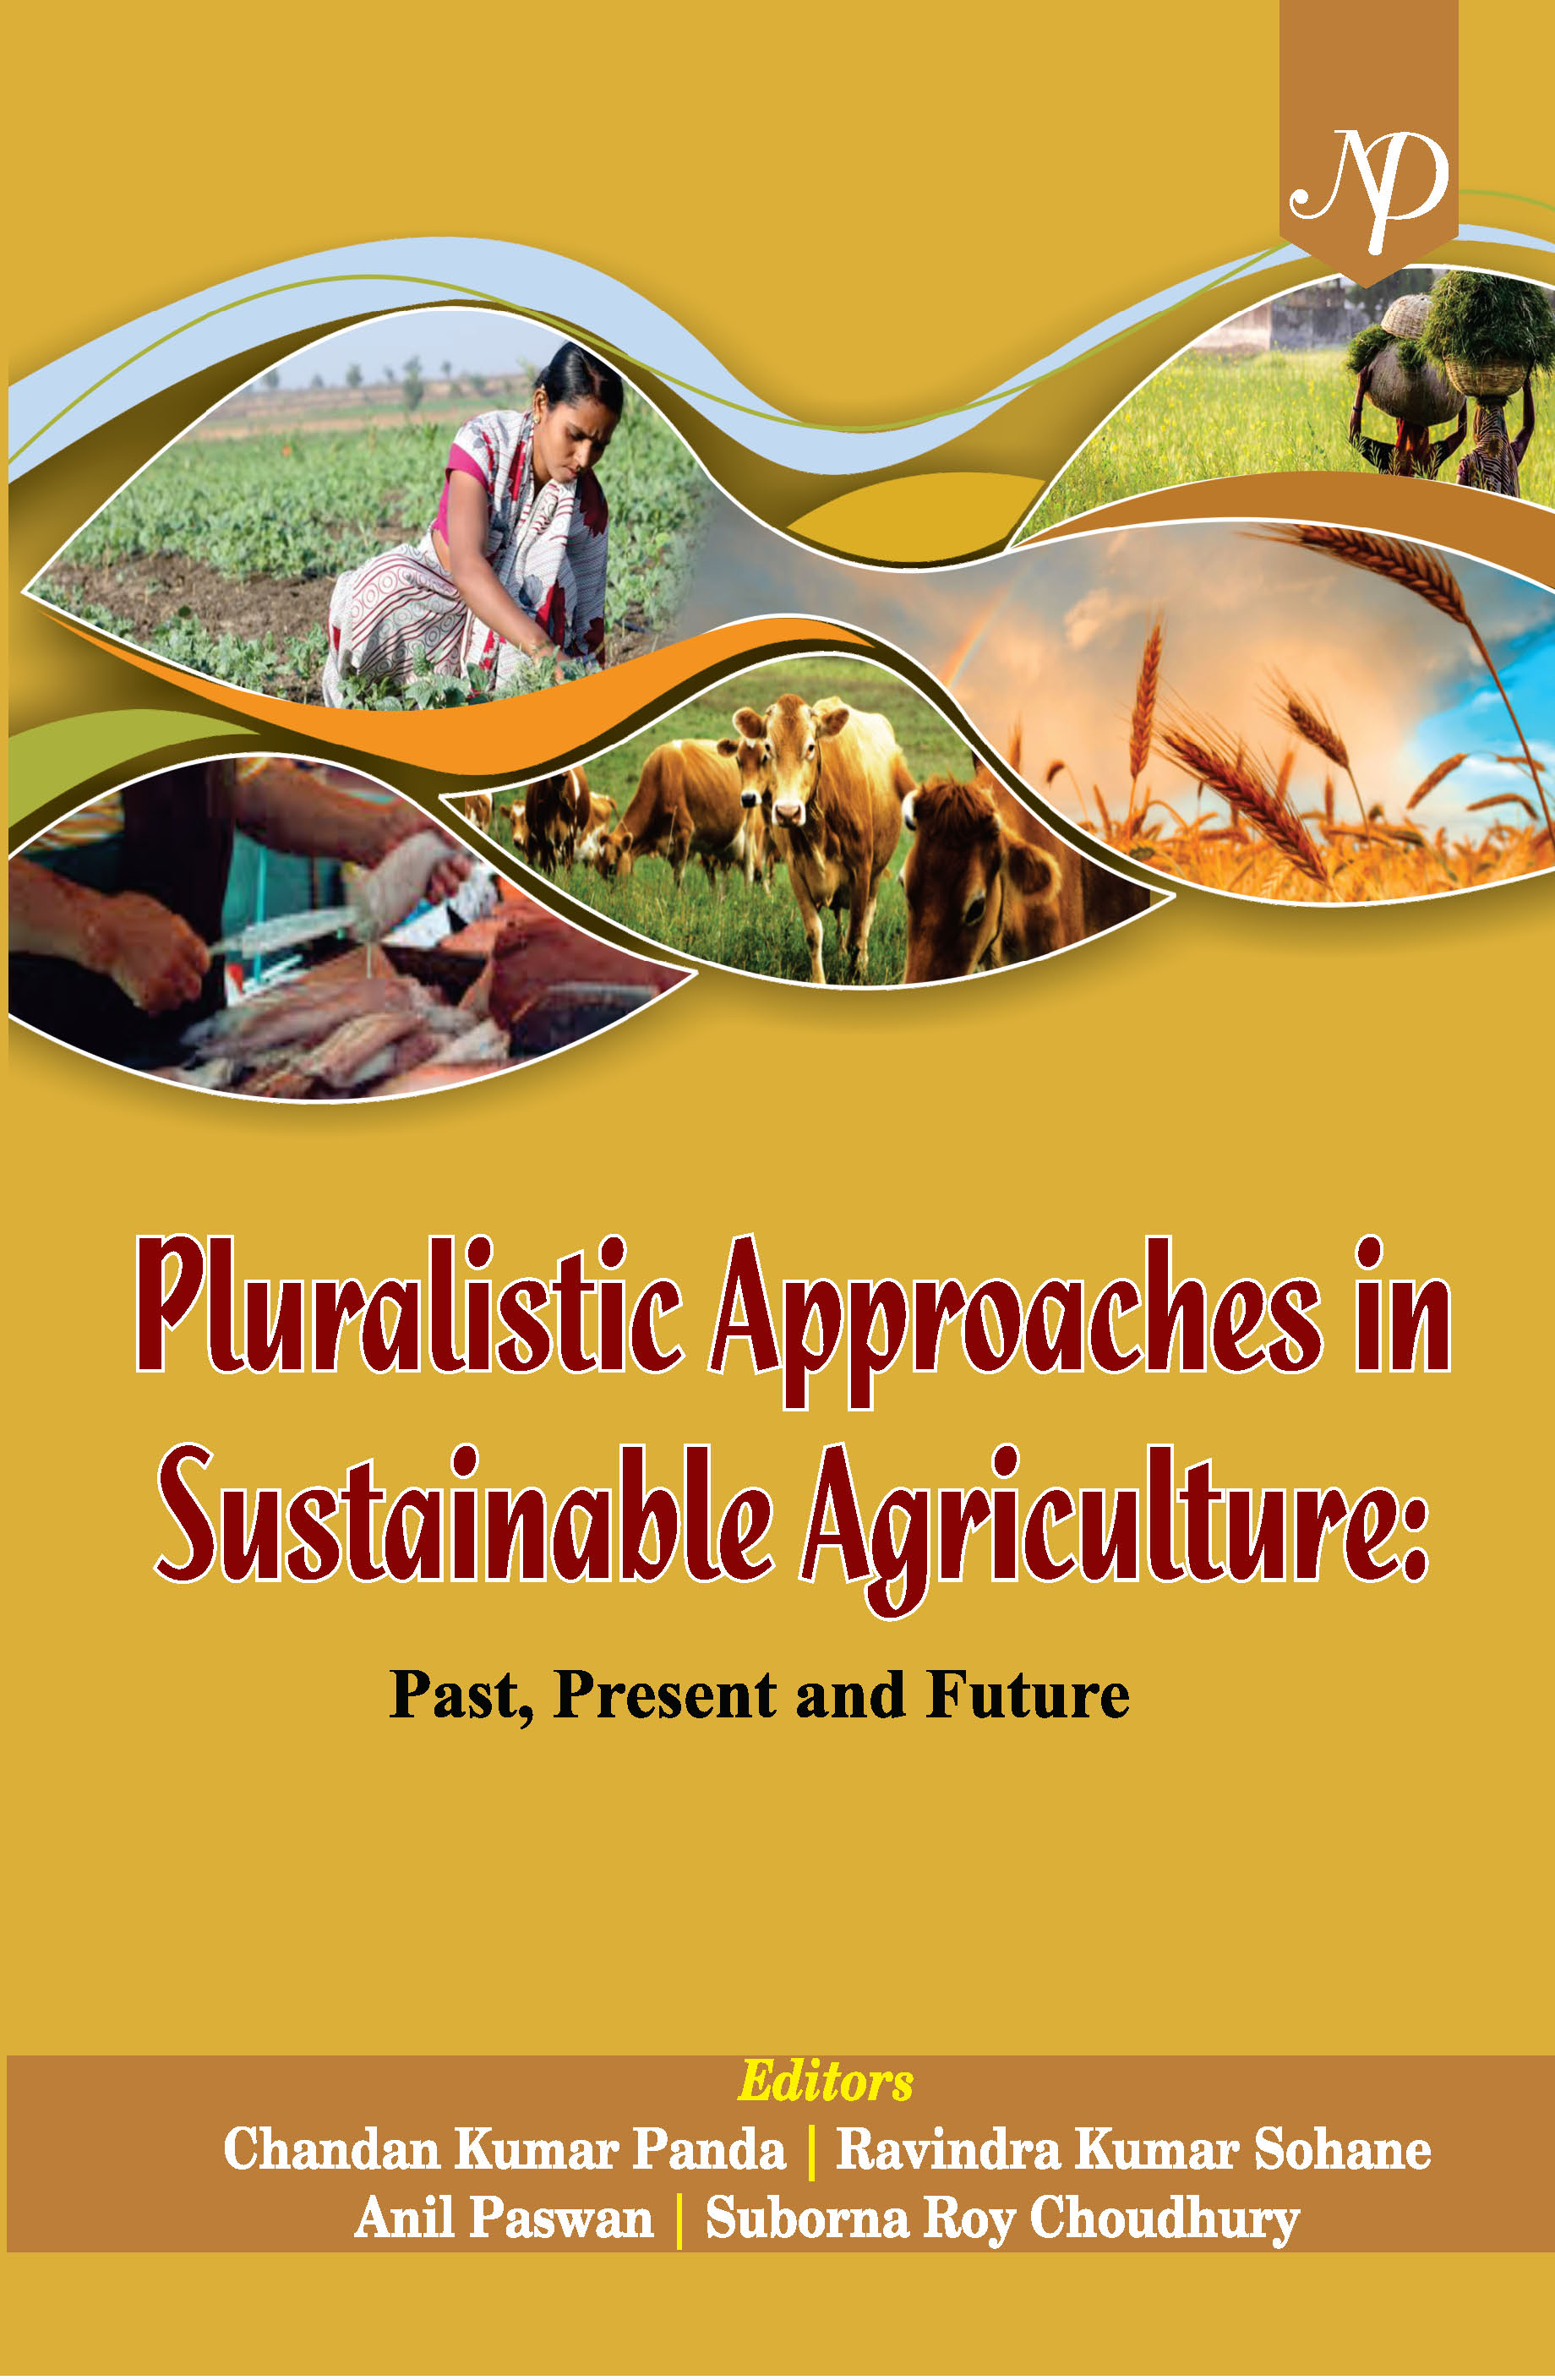 Pluralistic Approaches in Sustainable Agriculture Past, Present and Future Cover.jpg